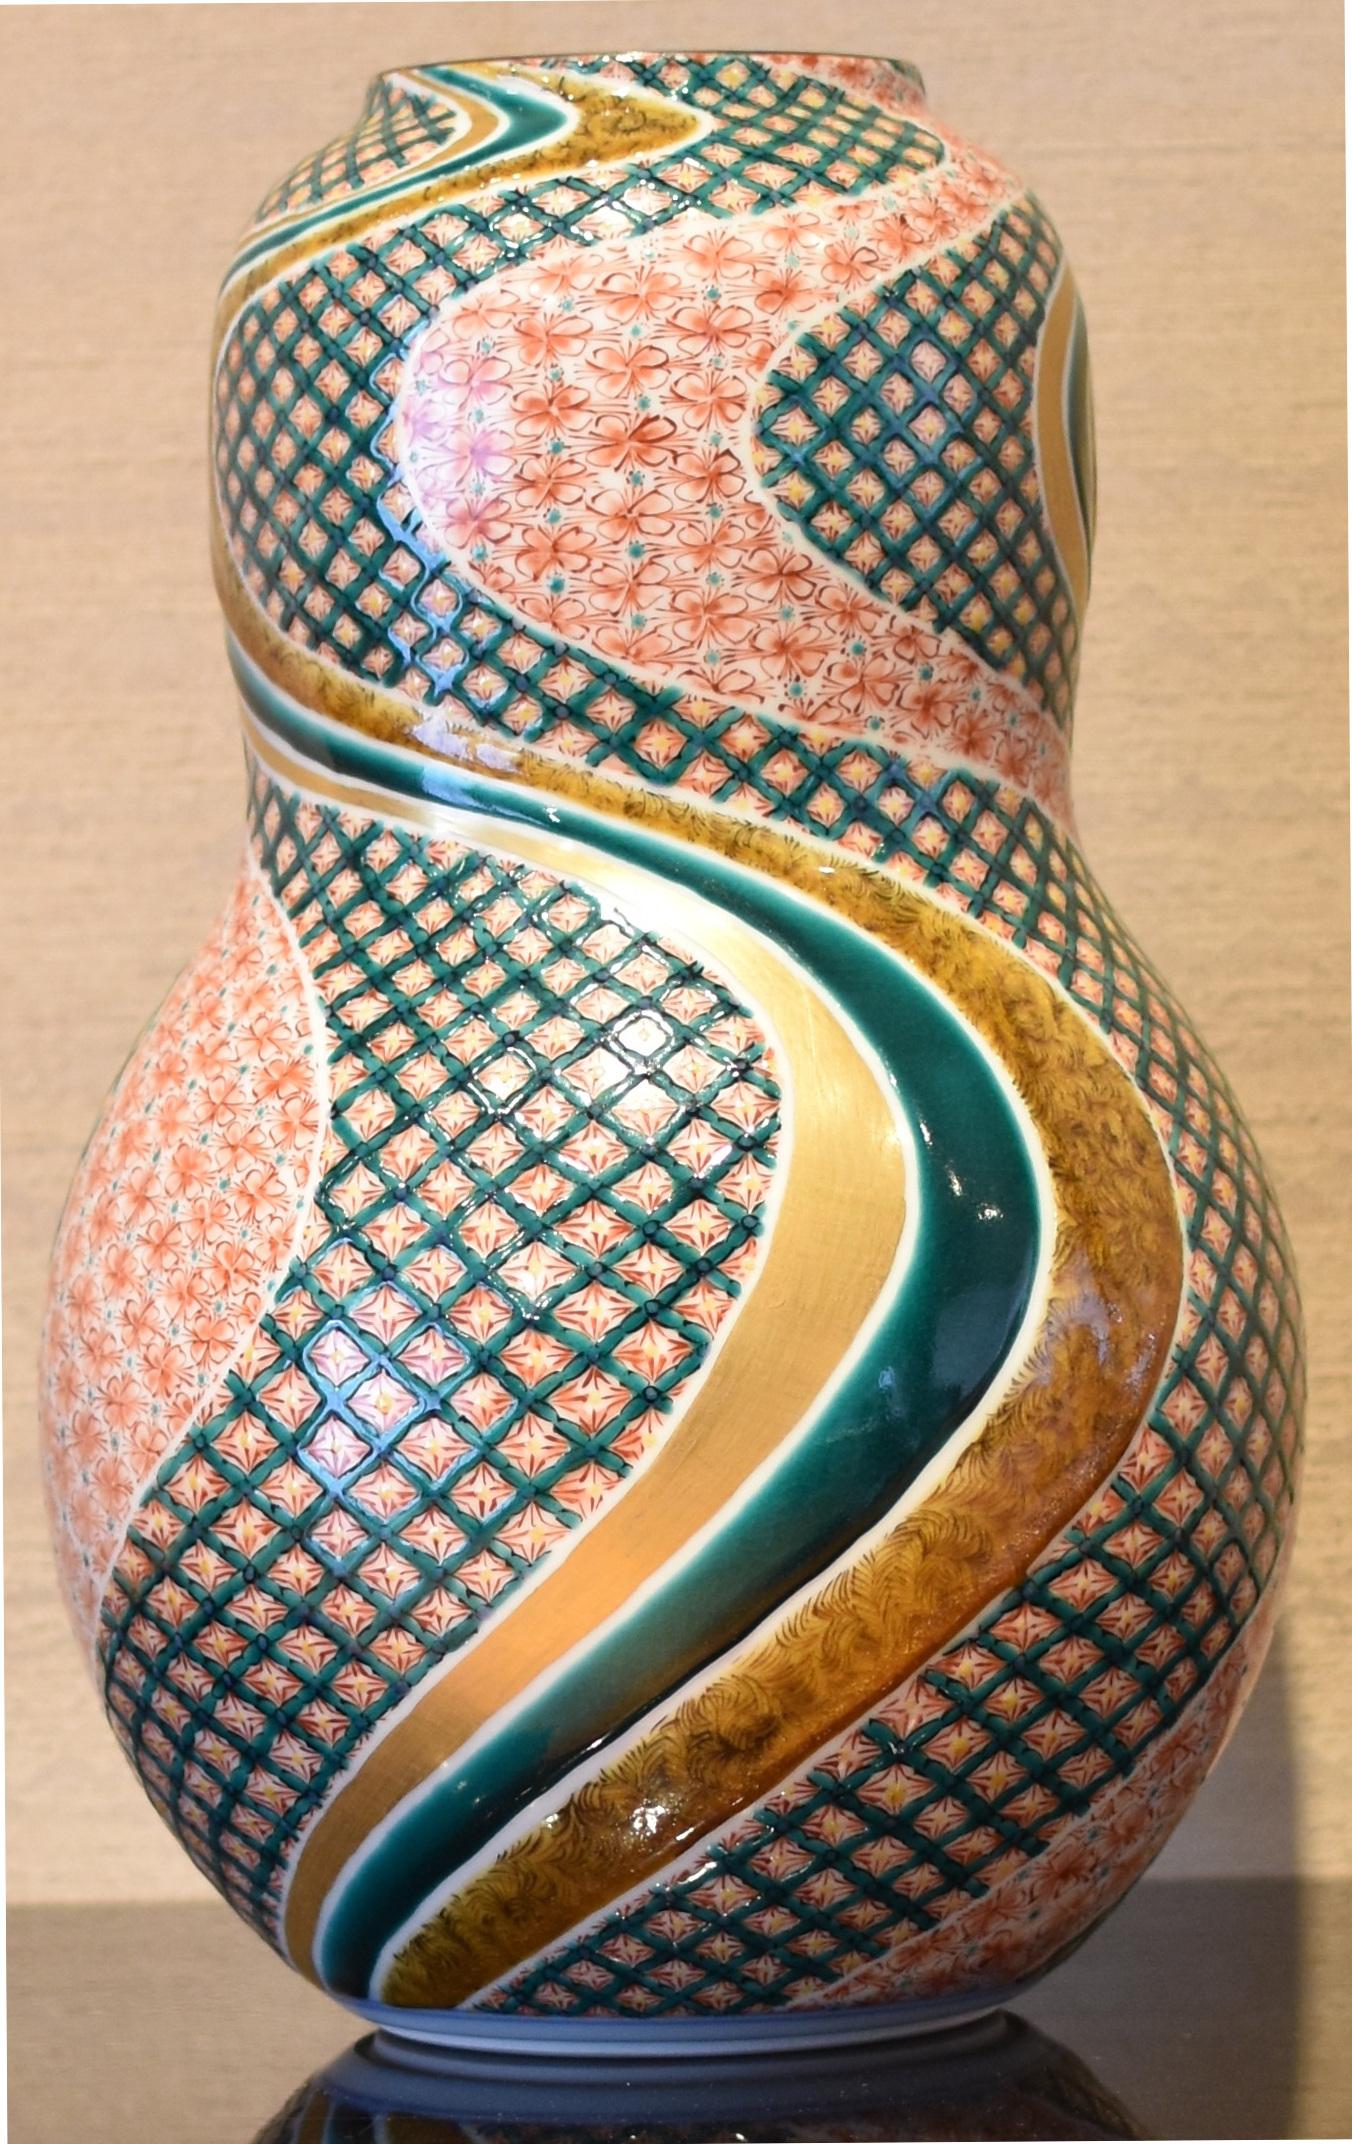 Mesmerizing Japanese contemporary museum-quality decorative porcelain vase, extremely intricately gilded and hand painted in red and green on a stunning double gourd body, a signed masterpiece by a third generation master porcelain artist from the